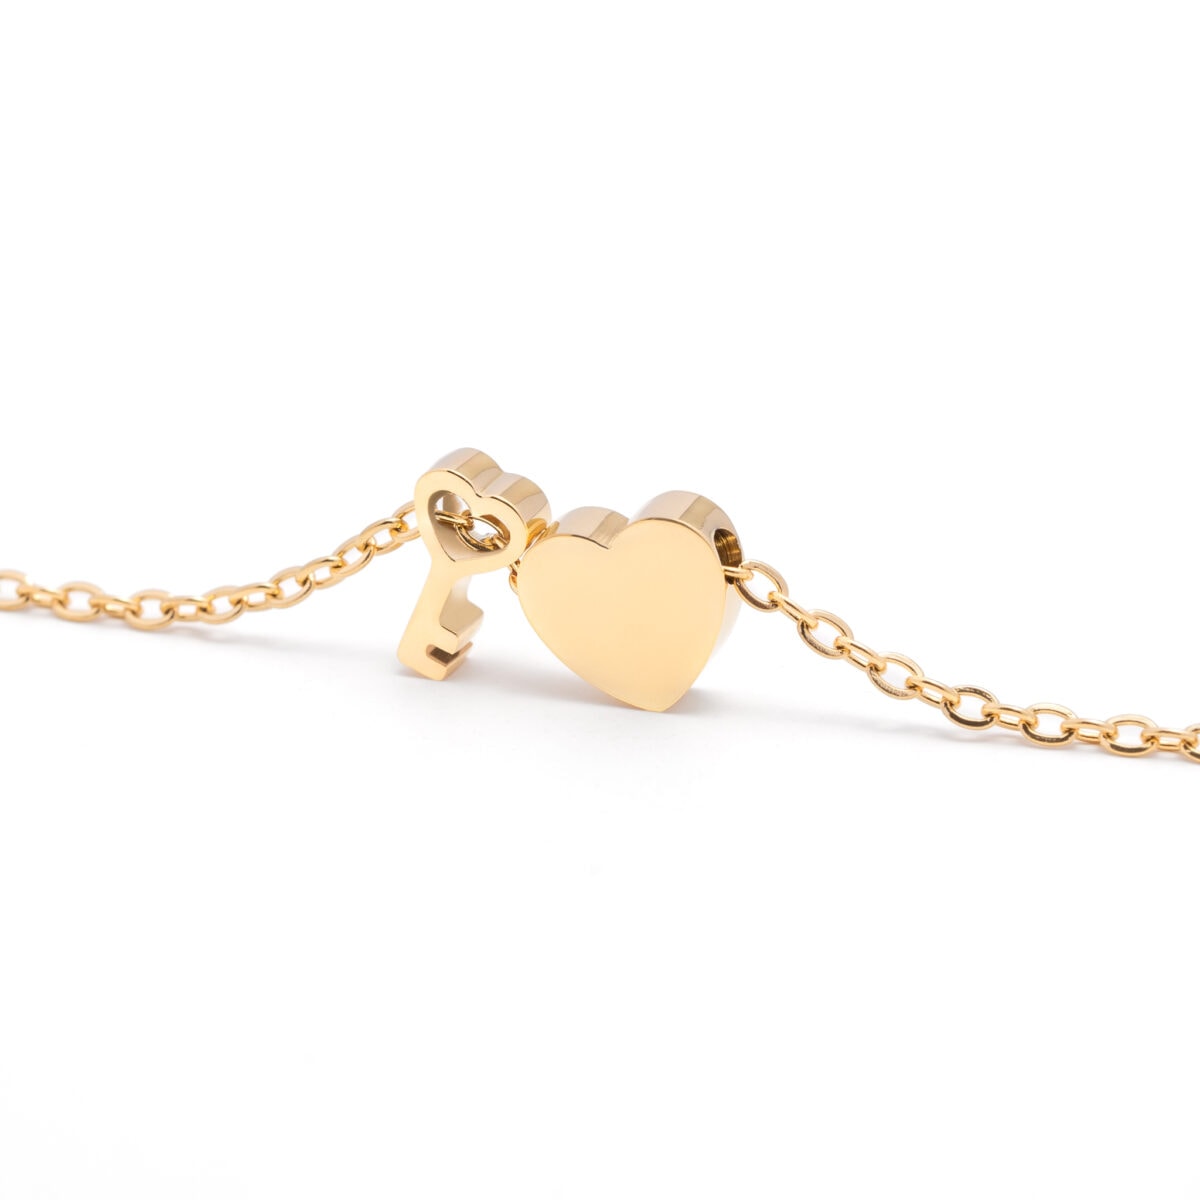 https://m.clubbella.co/product/key-to-thee-heart-gold-charm-necklace/ Key to Thee Gold (1)